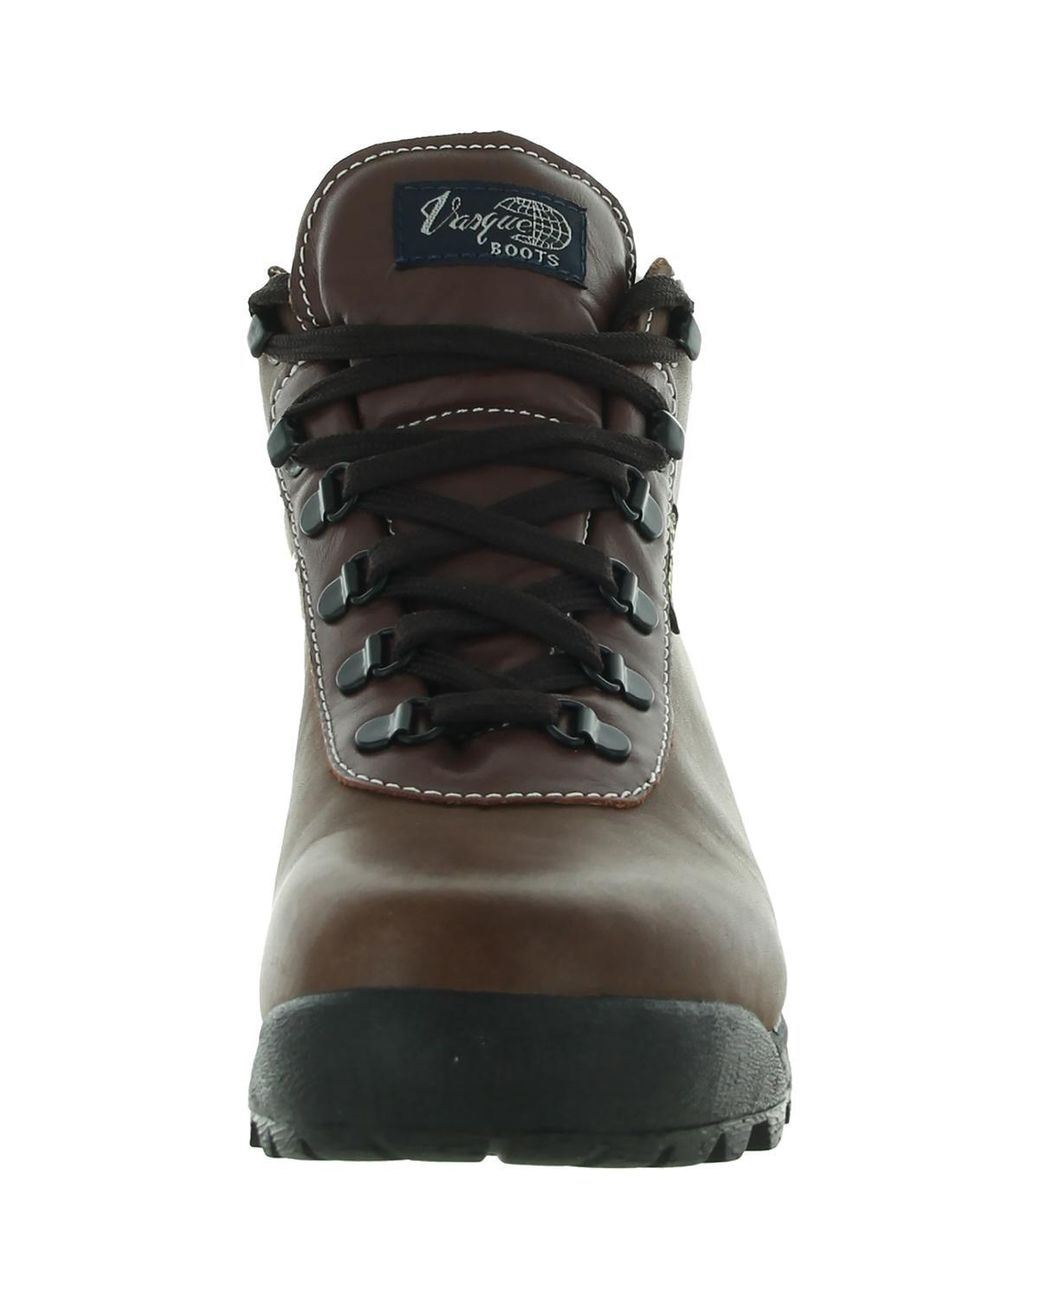 Vasque Sundowner Gtx Leather Lace Up Hiking Boots in Brown | Lyst